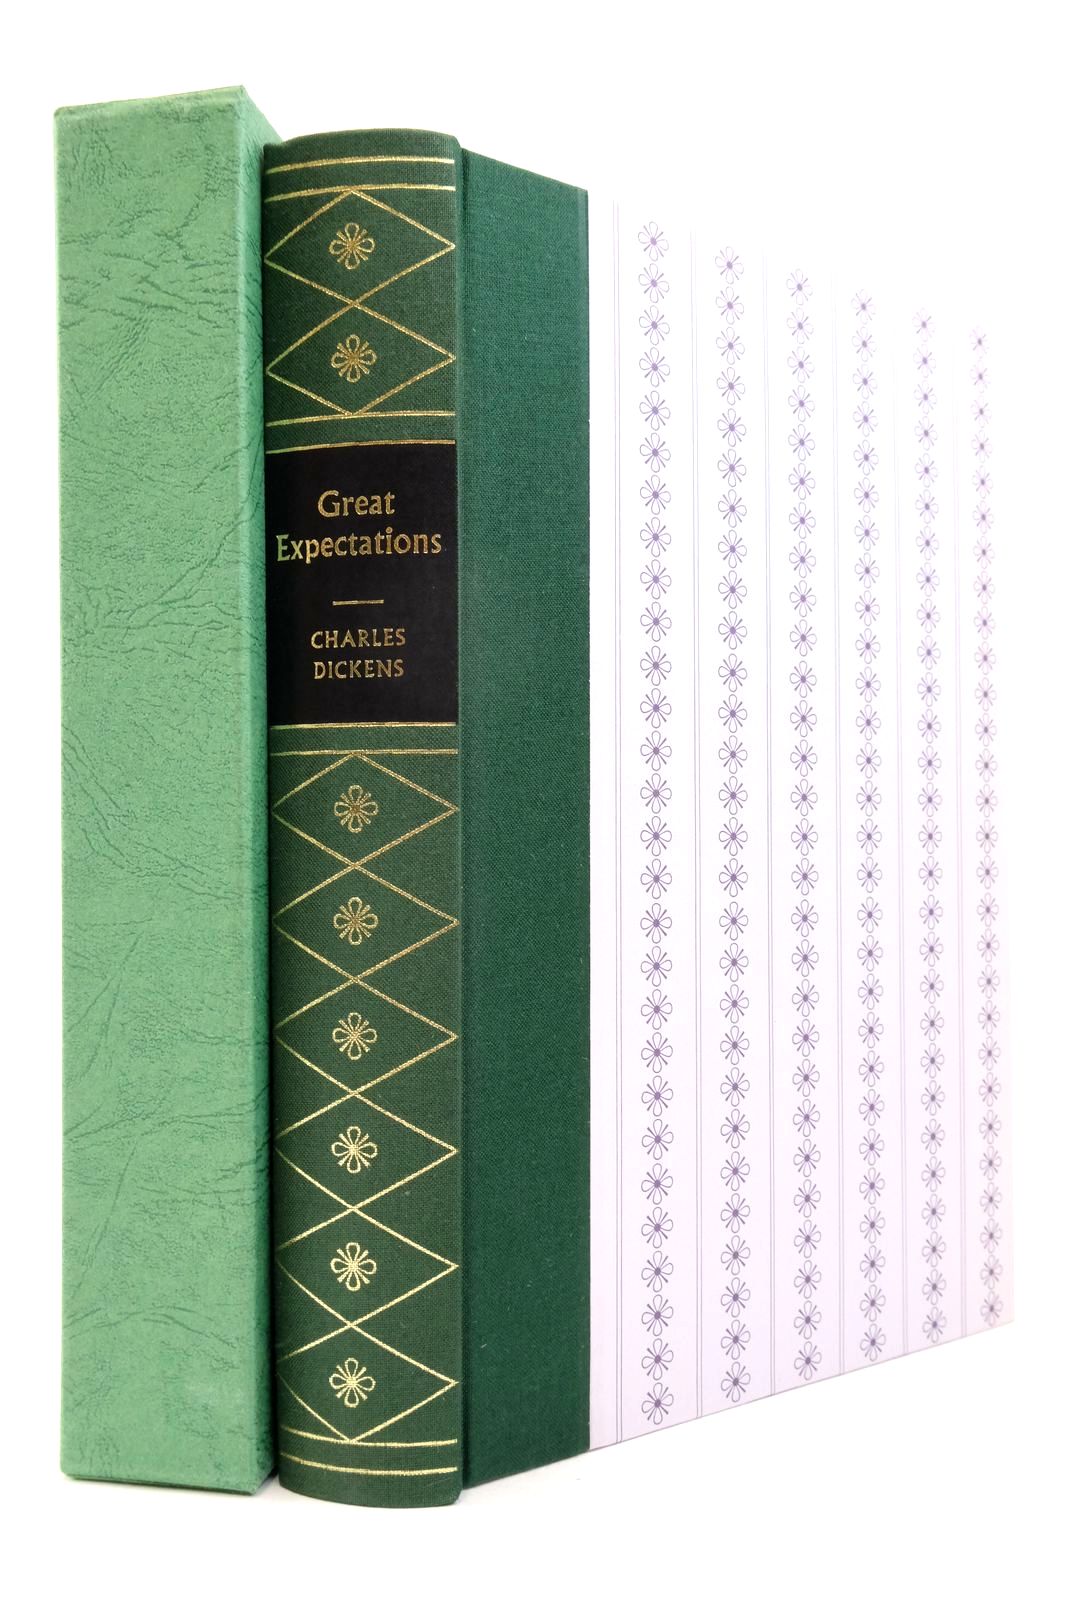 Photo of GREAT EXPECTATIONS written by Dickens, Charles illustrated by Keeping, Charles published by Folio Society (STOCK CODE: 2138520)  for sale by Stella & Rose's Books